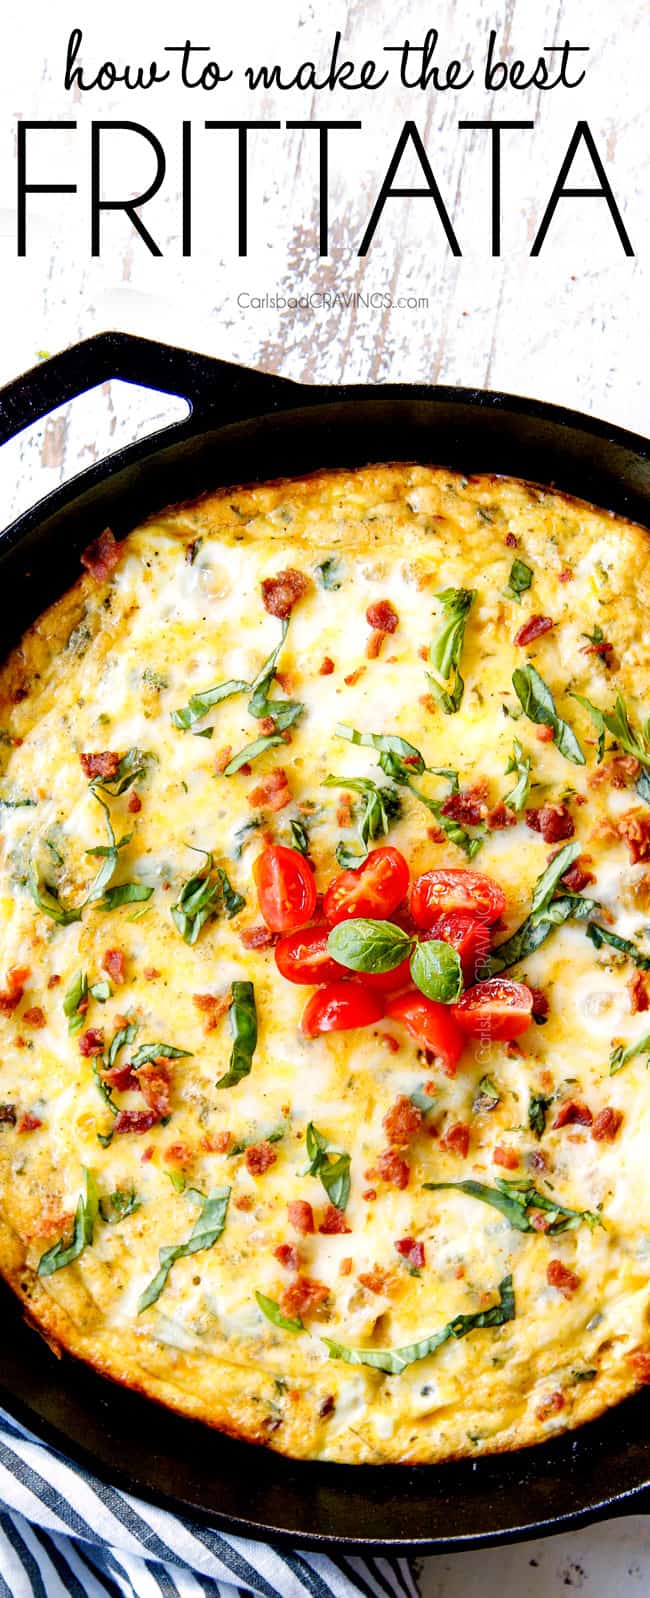 top view of egg frittata recipe baked in the oven